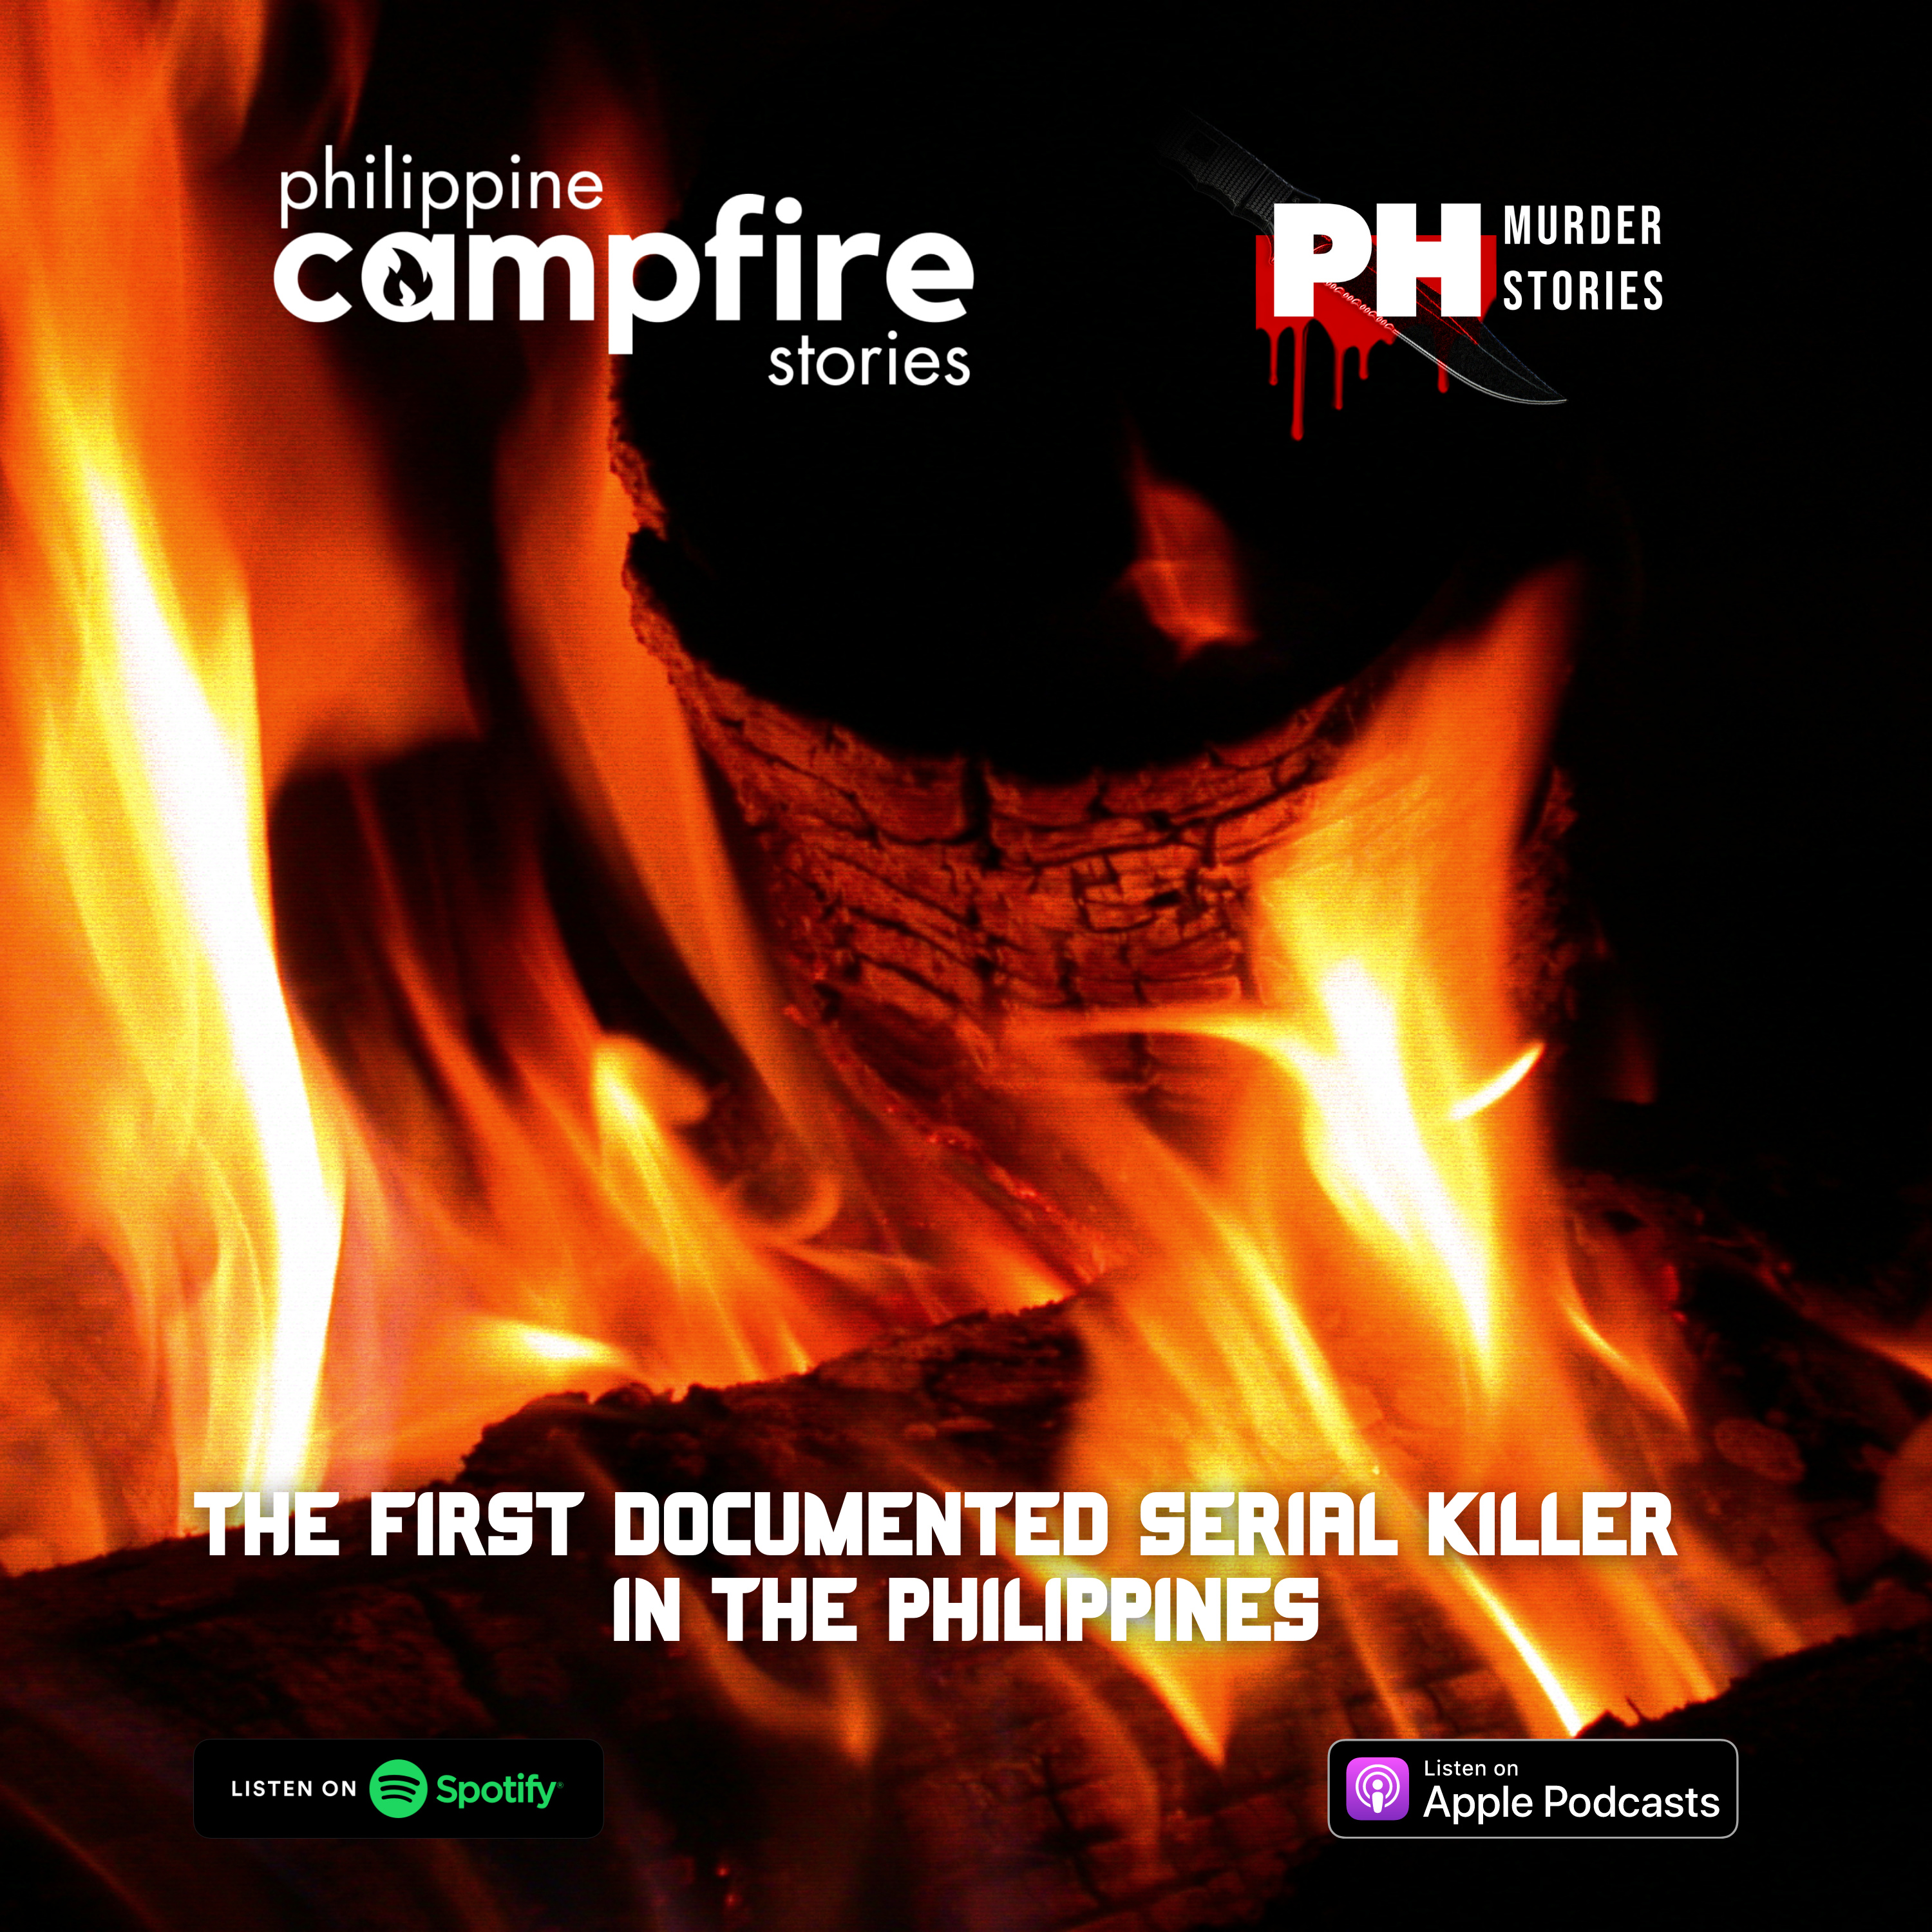 Padre Juan Severino Mallari: The First-Ever Documented Serial Killer in the Philippines (In collaboration with Philippine Campfire Stories)